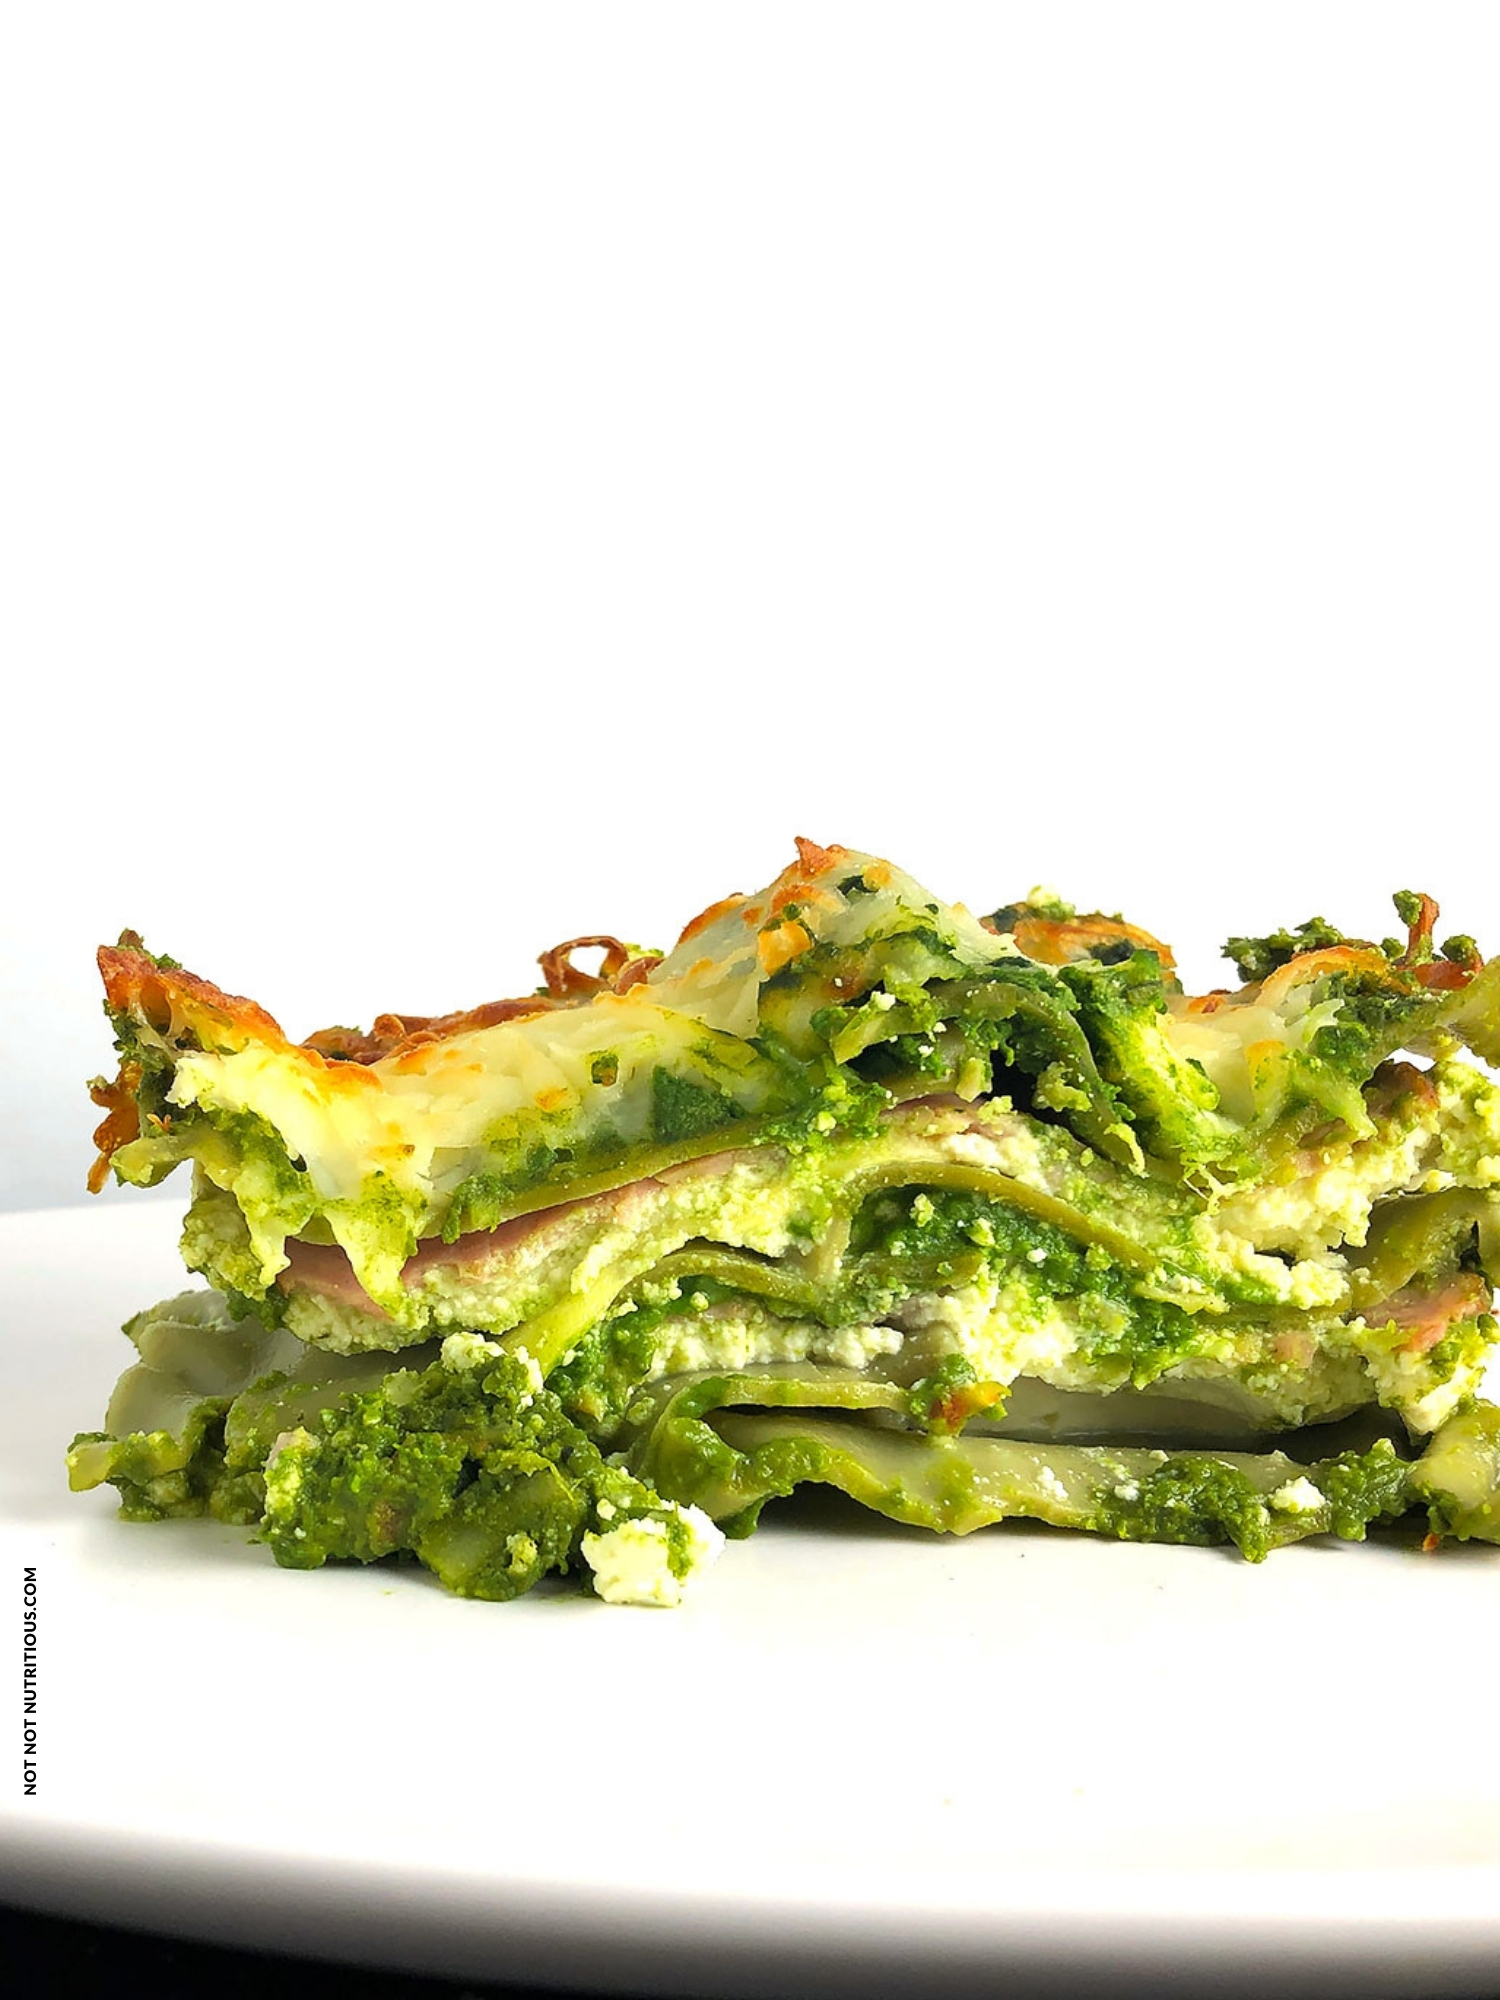 Side shot of slice of Green Lasagna on a black plate against a white background. 